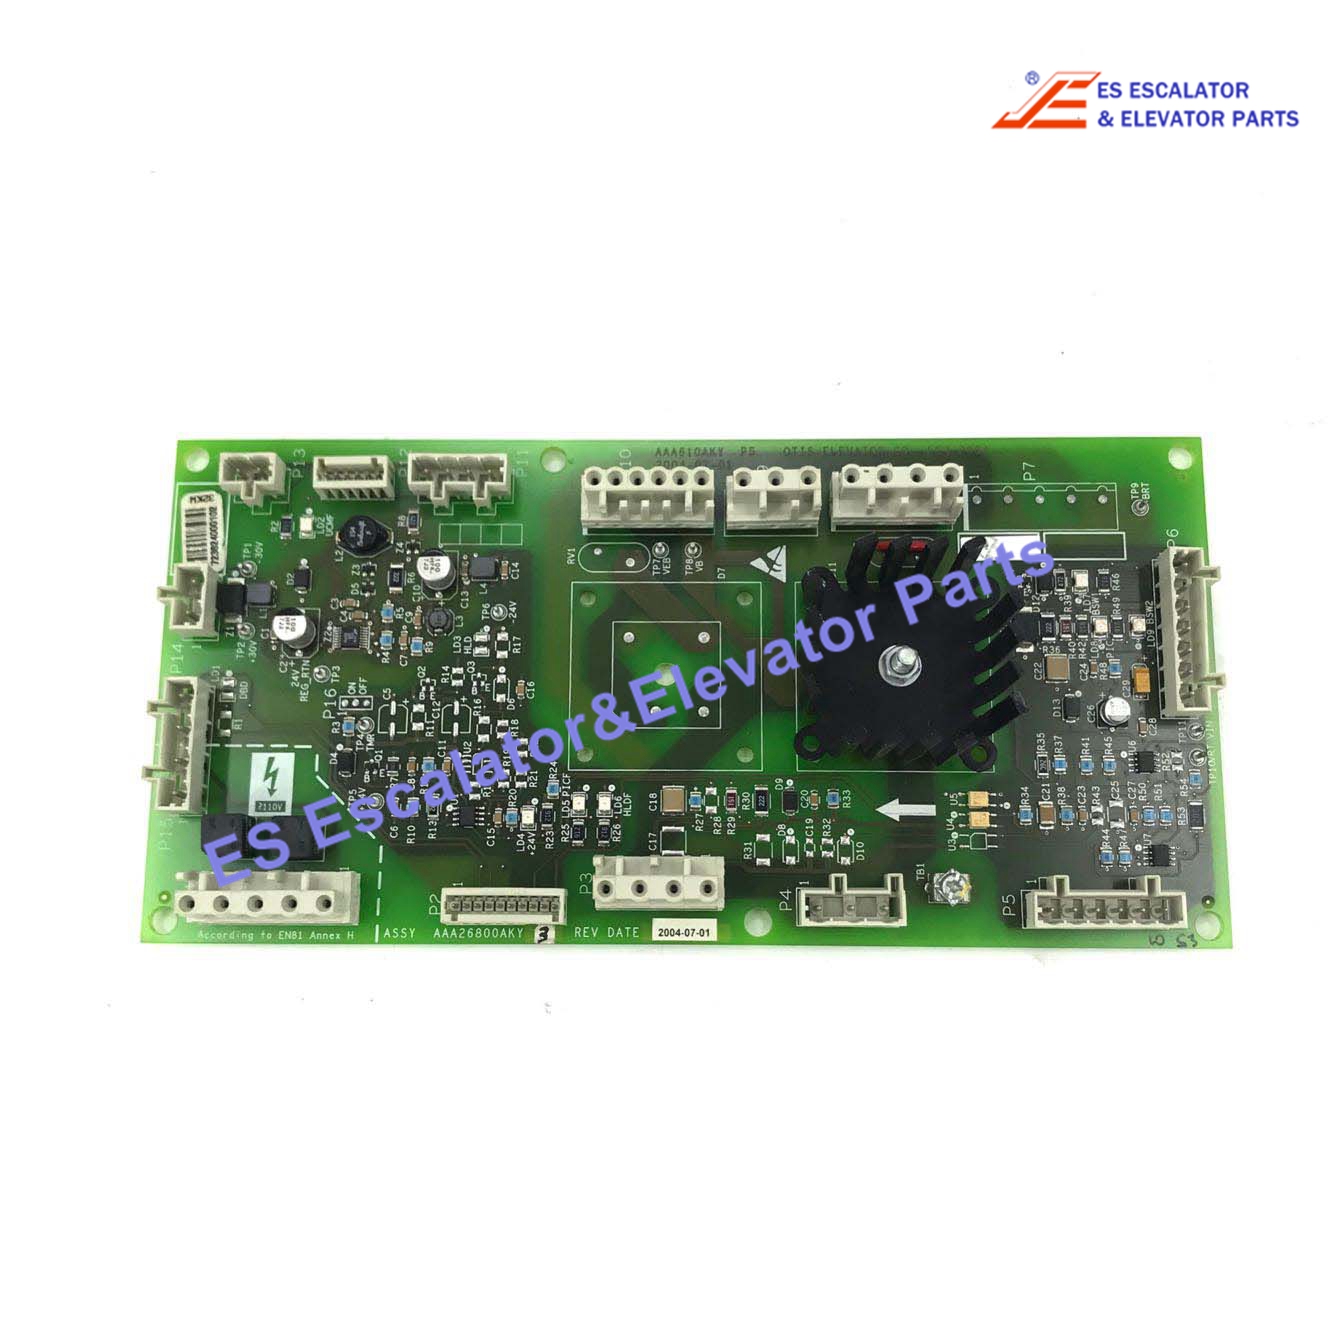 AAA26800AKY3 Elevator PCB Board Use For Otis